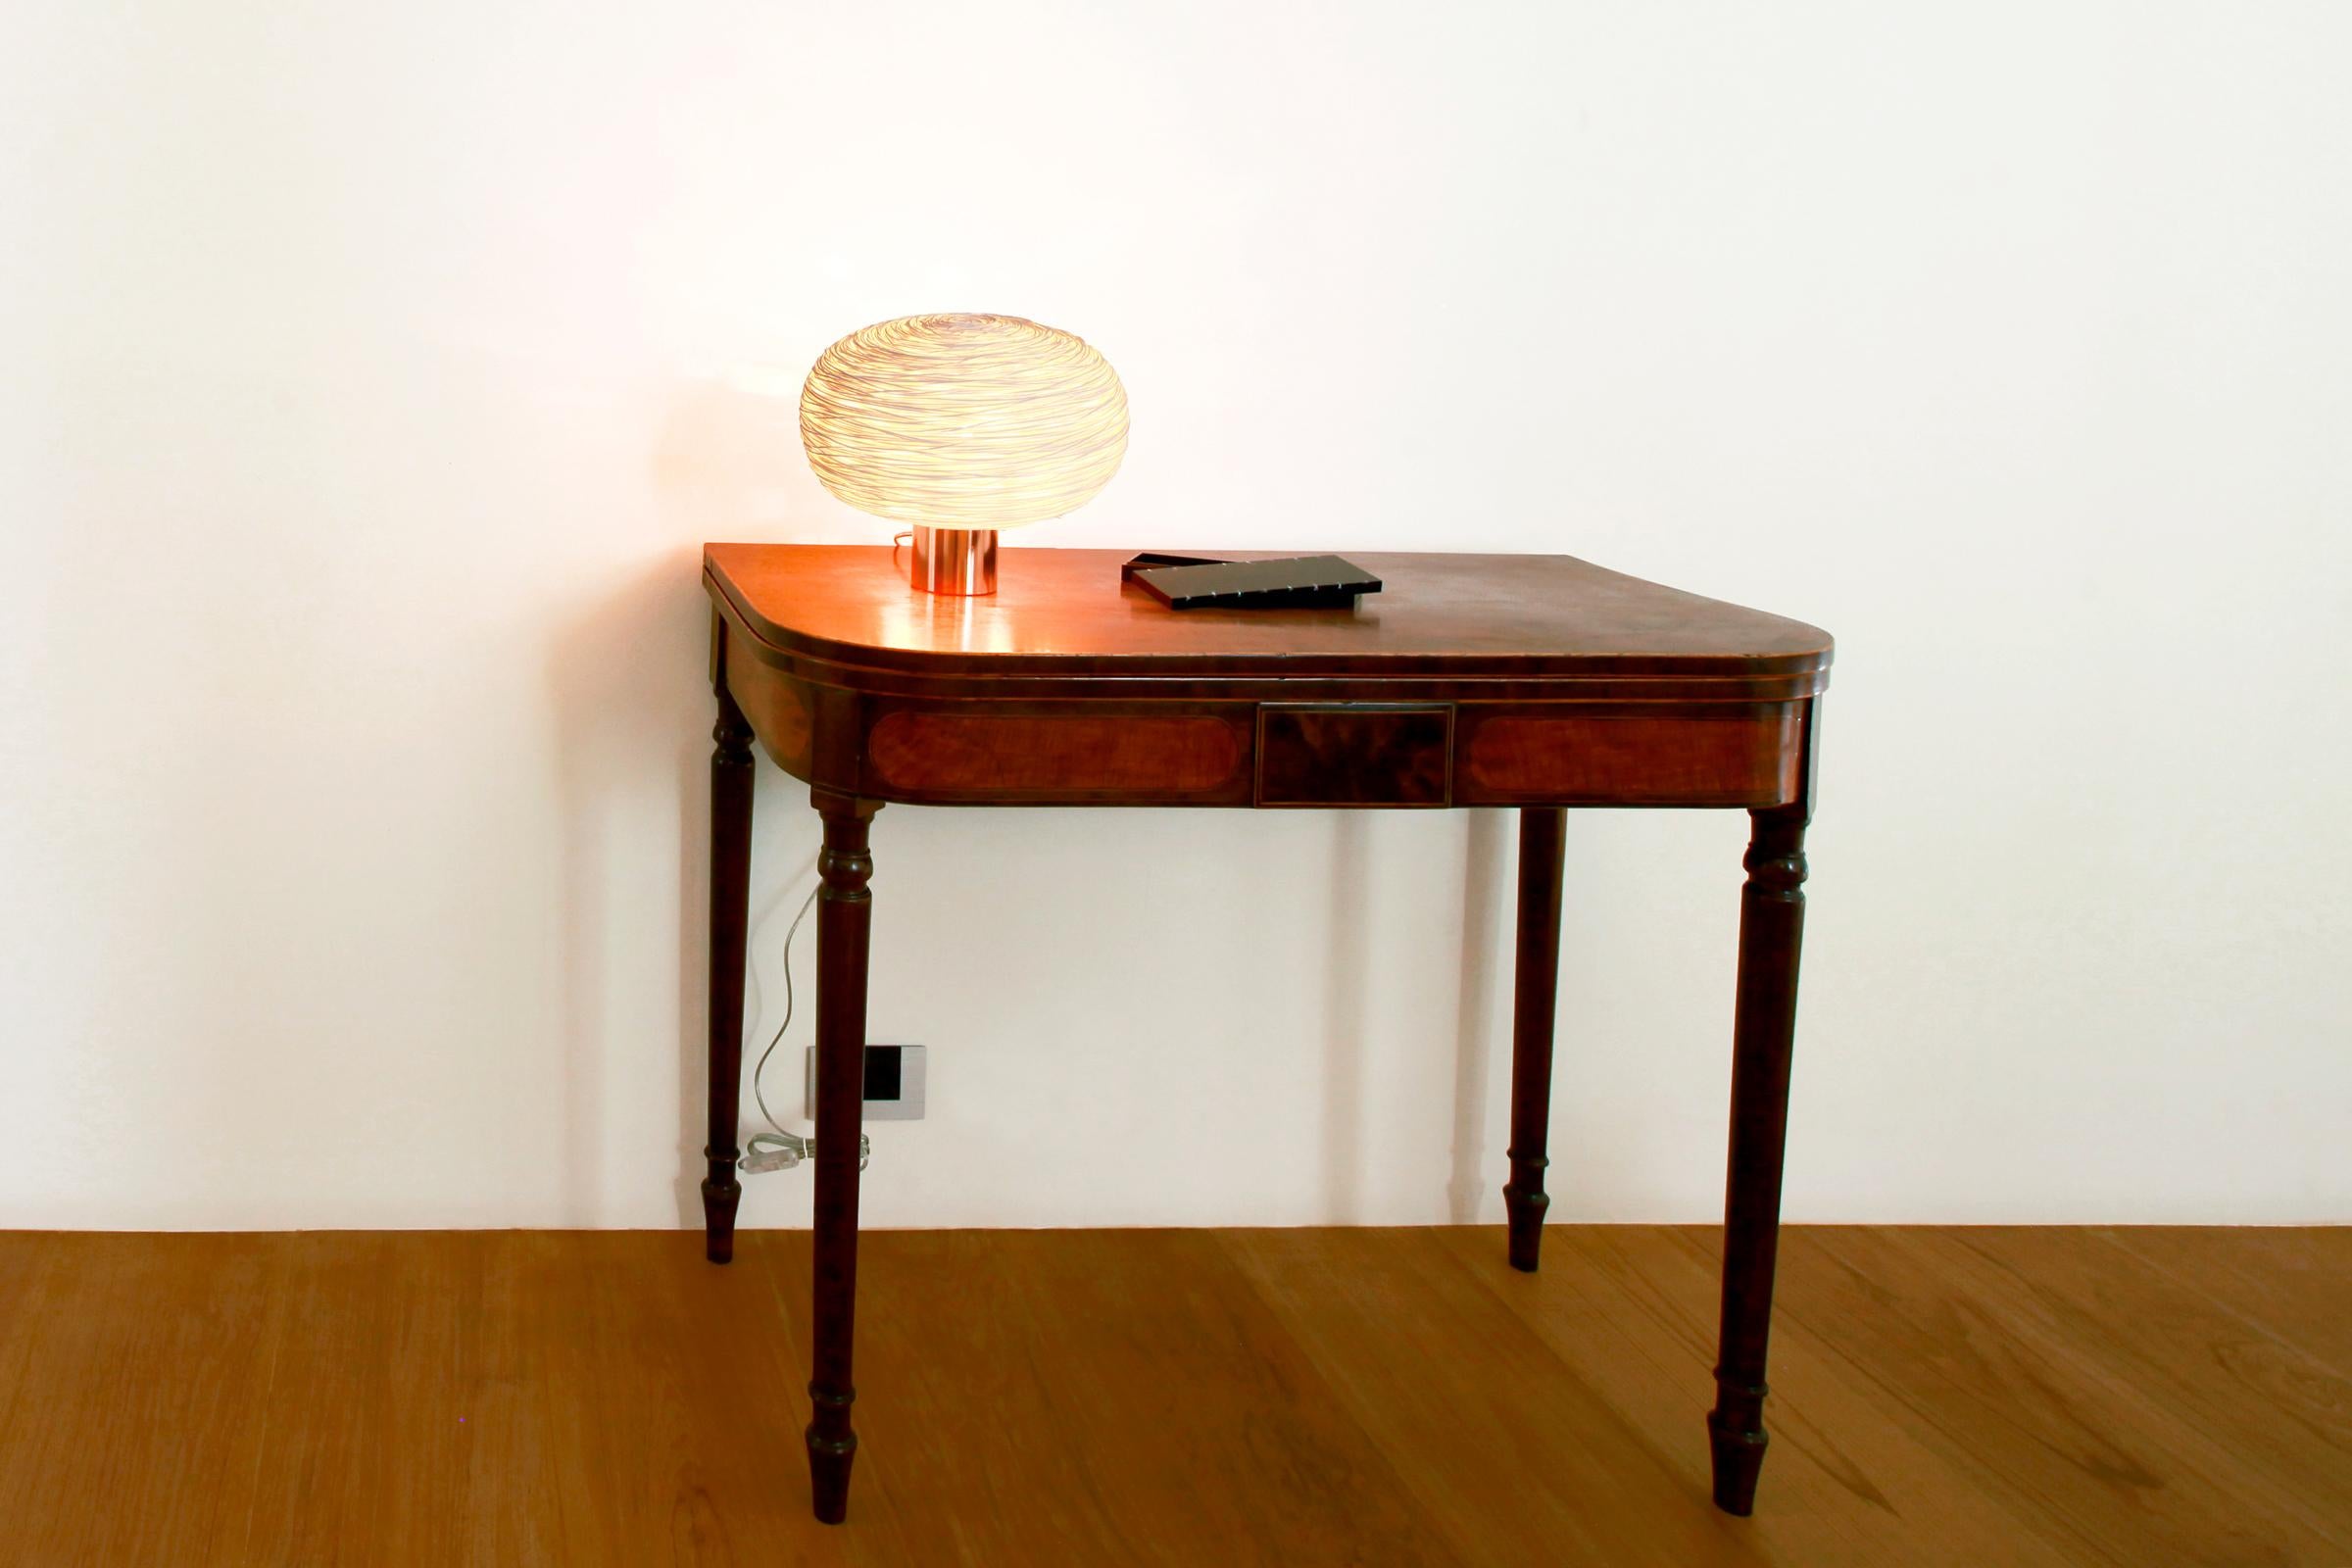 Unit 'Table-R' by Ango, Handmade Rattan Table Light with Copper Finish In New Condition For Sale In Bangkok, TH